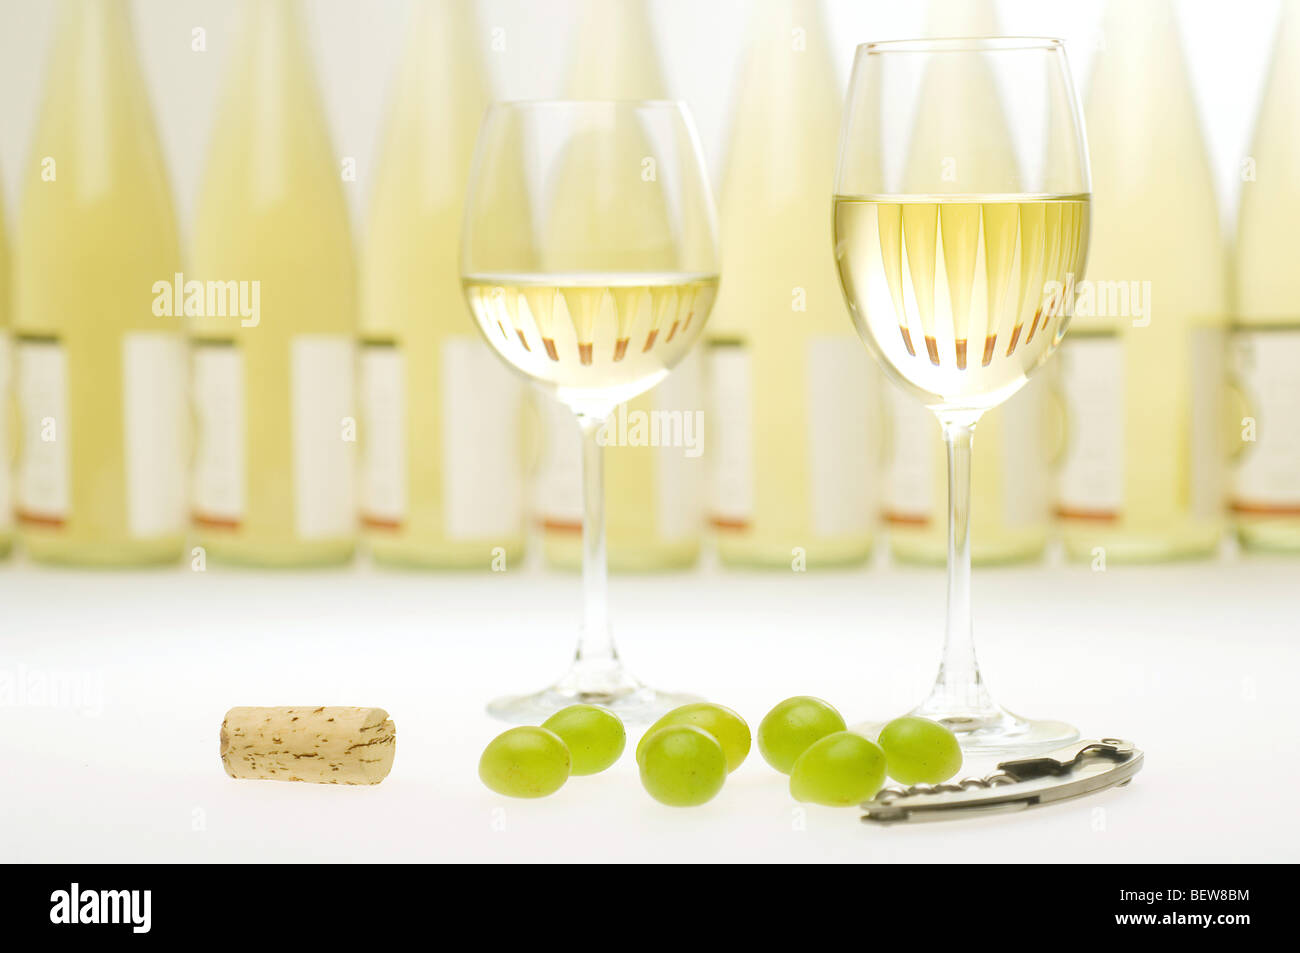 Two filled white wine glasses in front of a row of wine bottles, still life Stock Photo